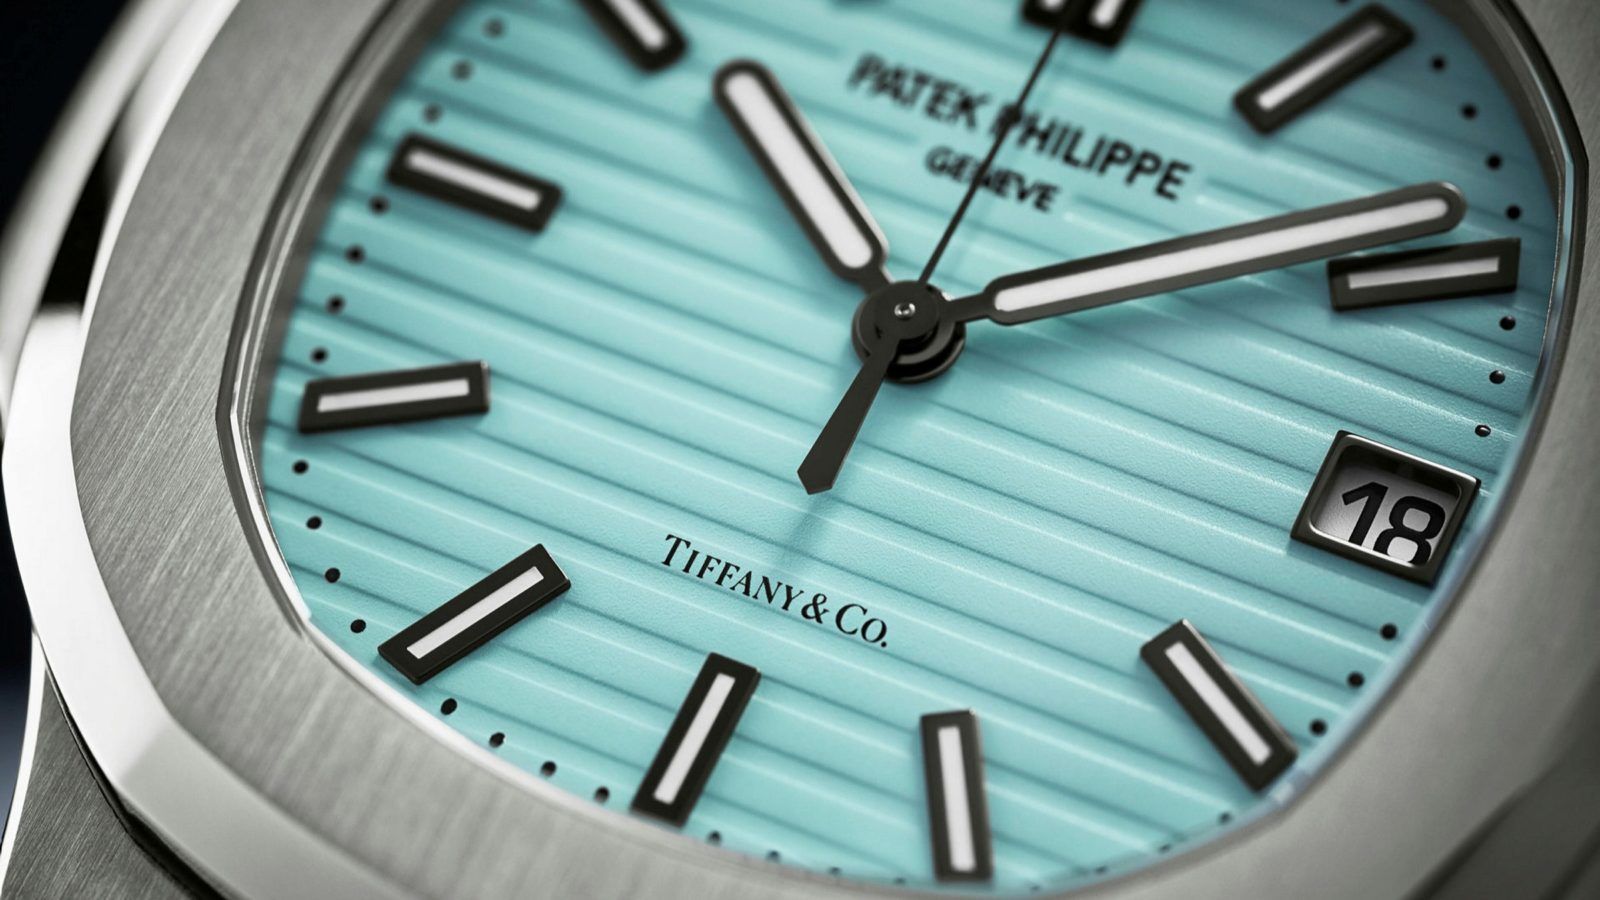 Patek Philippe’s final 5711 is a gorgeous Tiffany & Co blue-dialed Nautilus